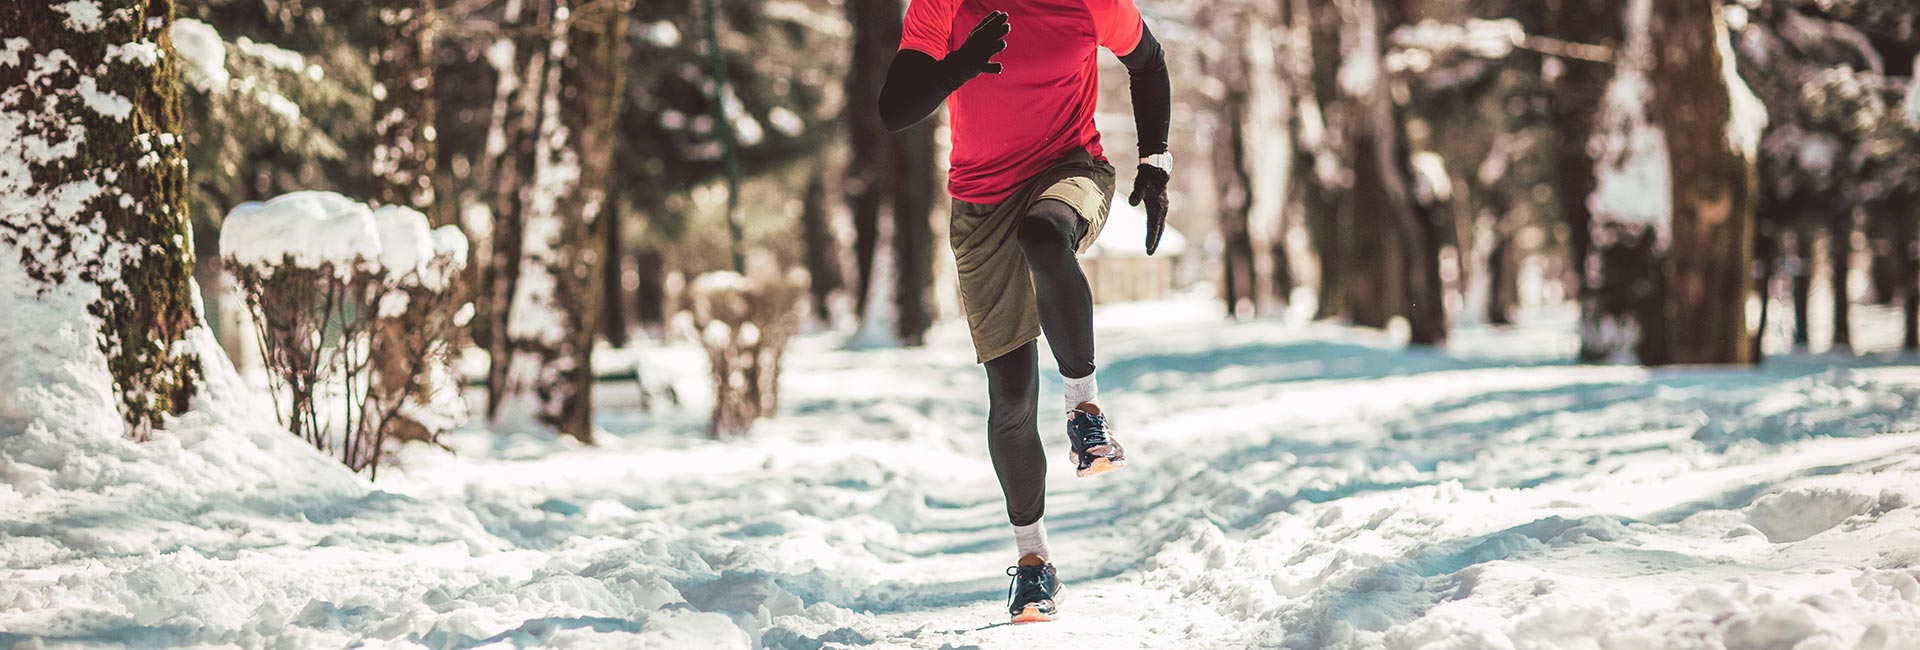 winter running can be safe and fun